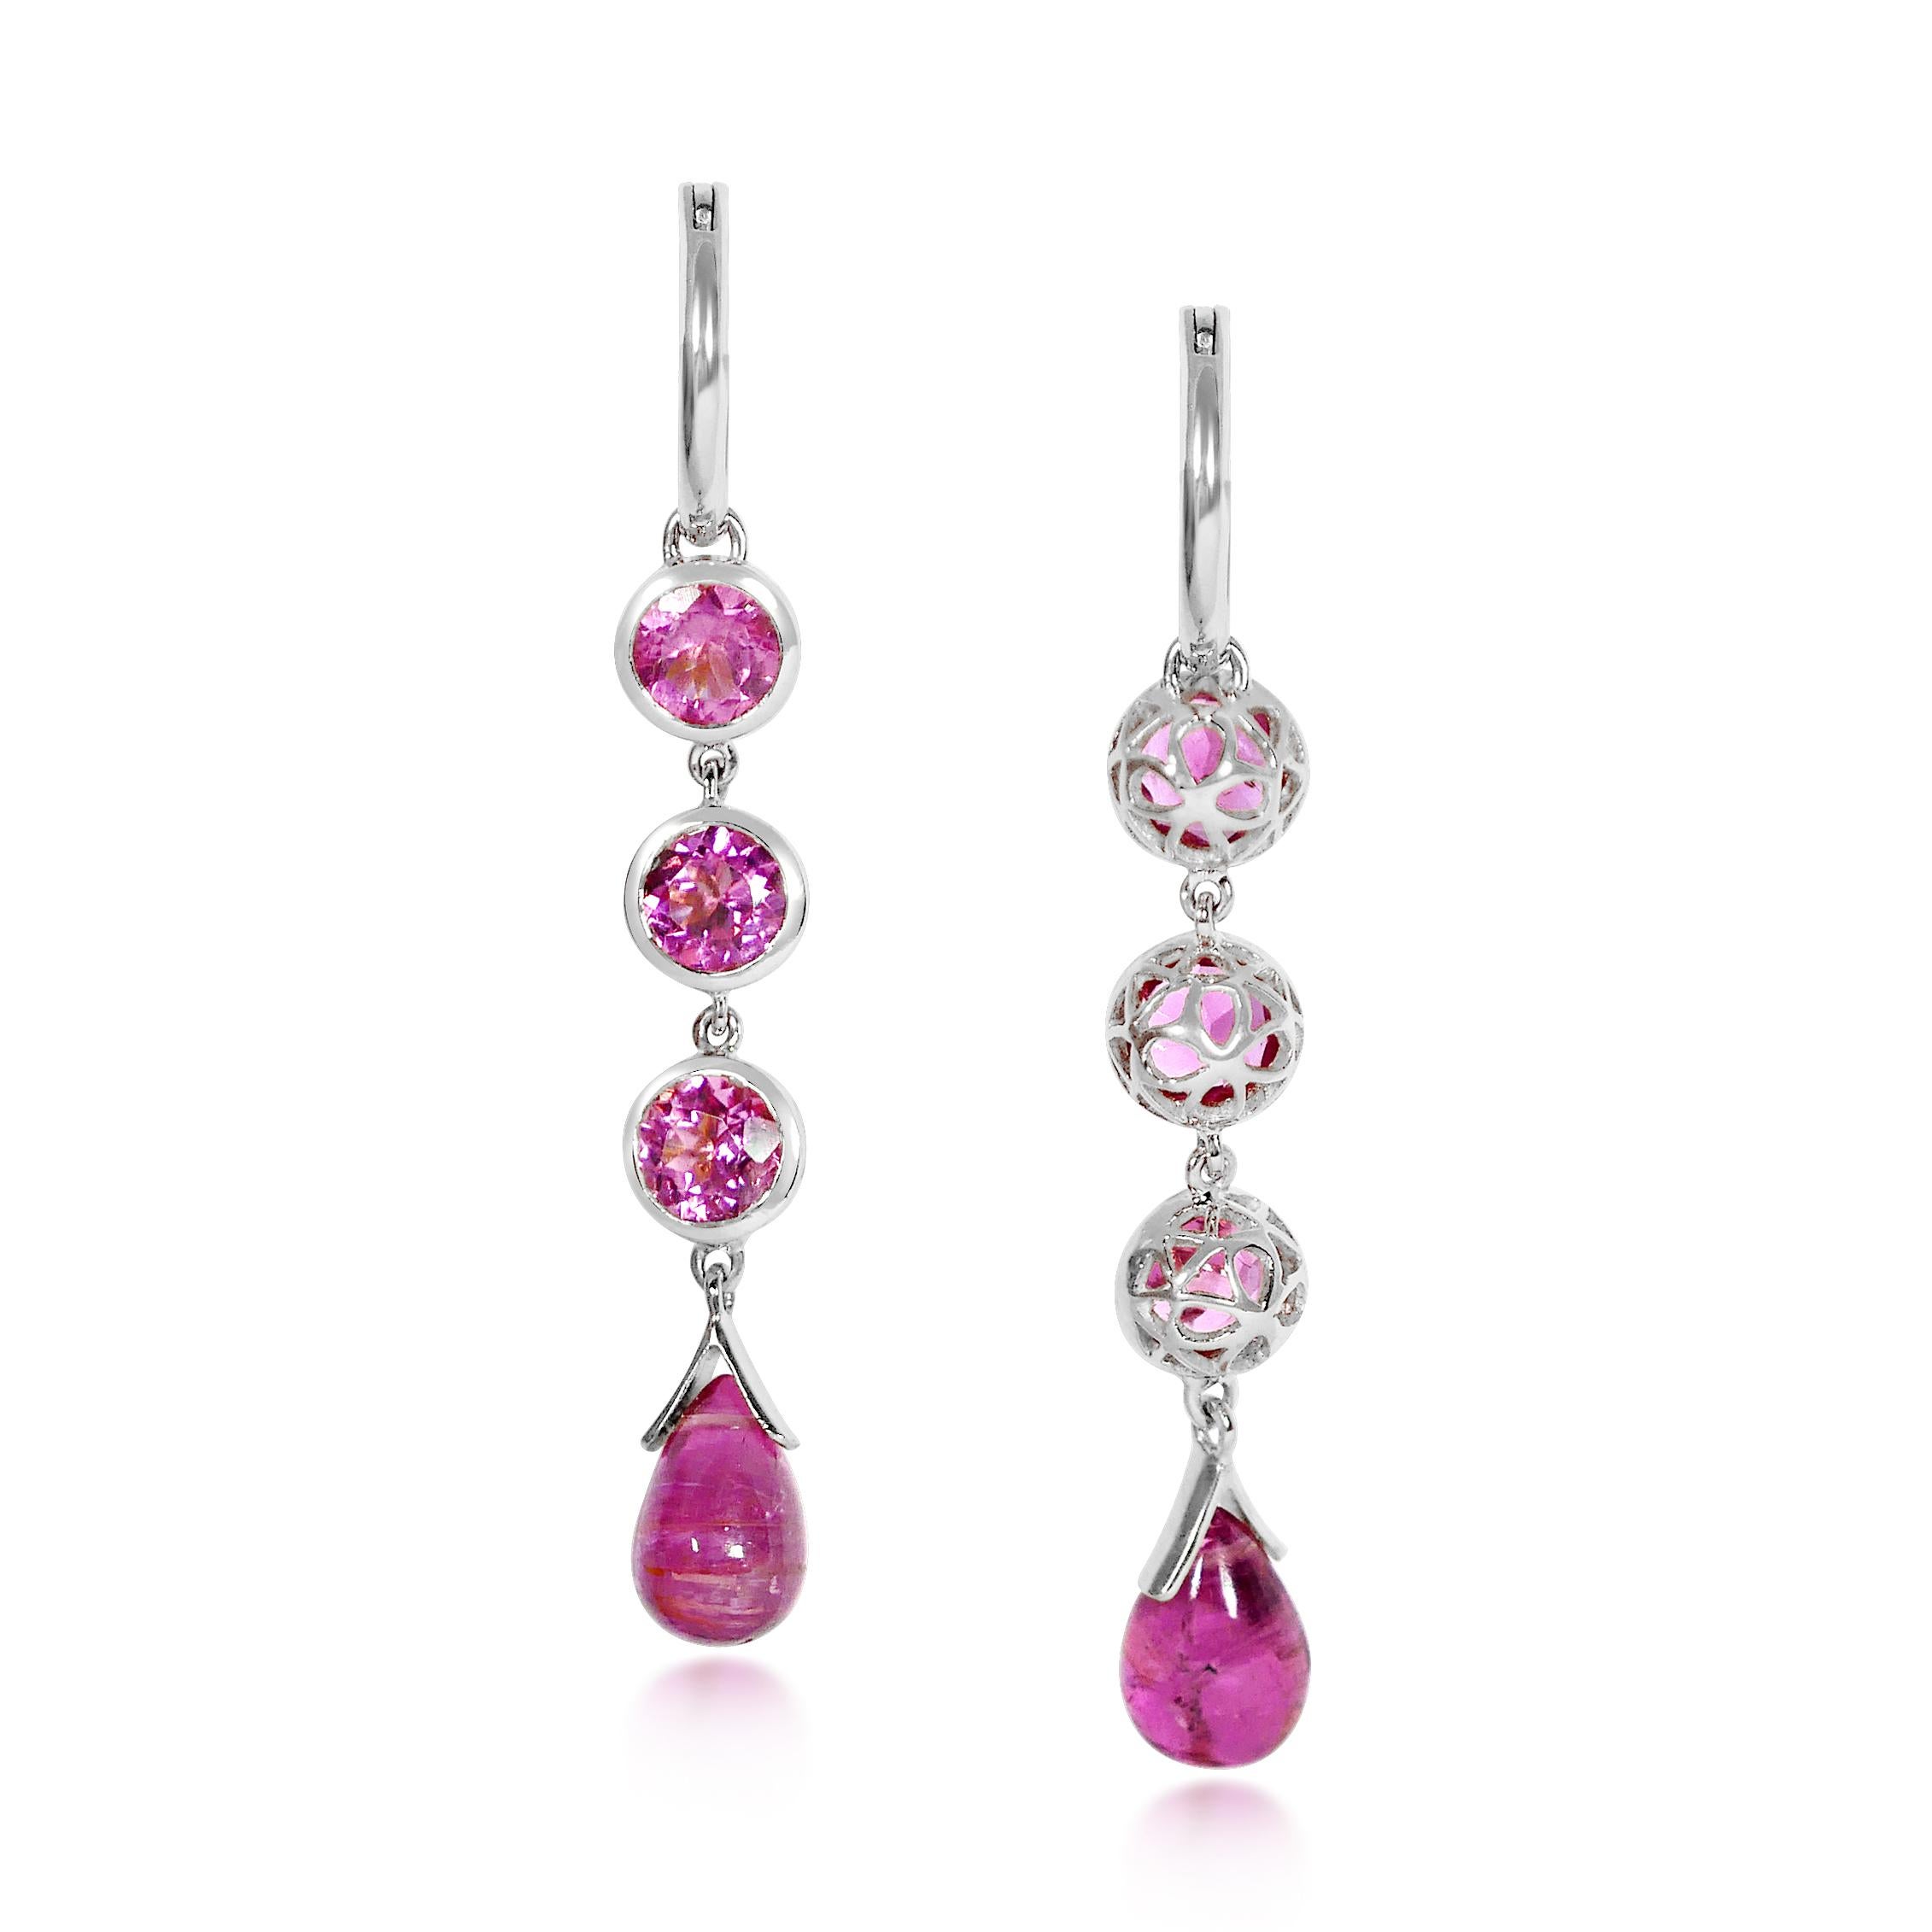 Handcrafted 1.50 Carats Pink Tourmaline 18 Karat White Gold Drop Earrings. Our stone cascade-like earrings are an elegant statement underlined by romantic dancing drops carved in Pink Tourmaline under a set of 6mm round cut Pink Tourmaline stones